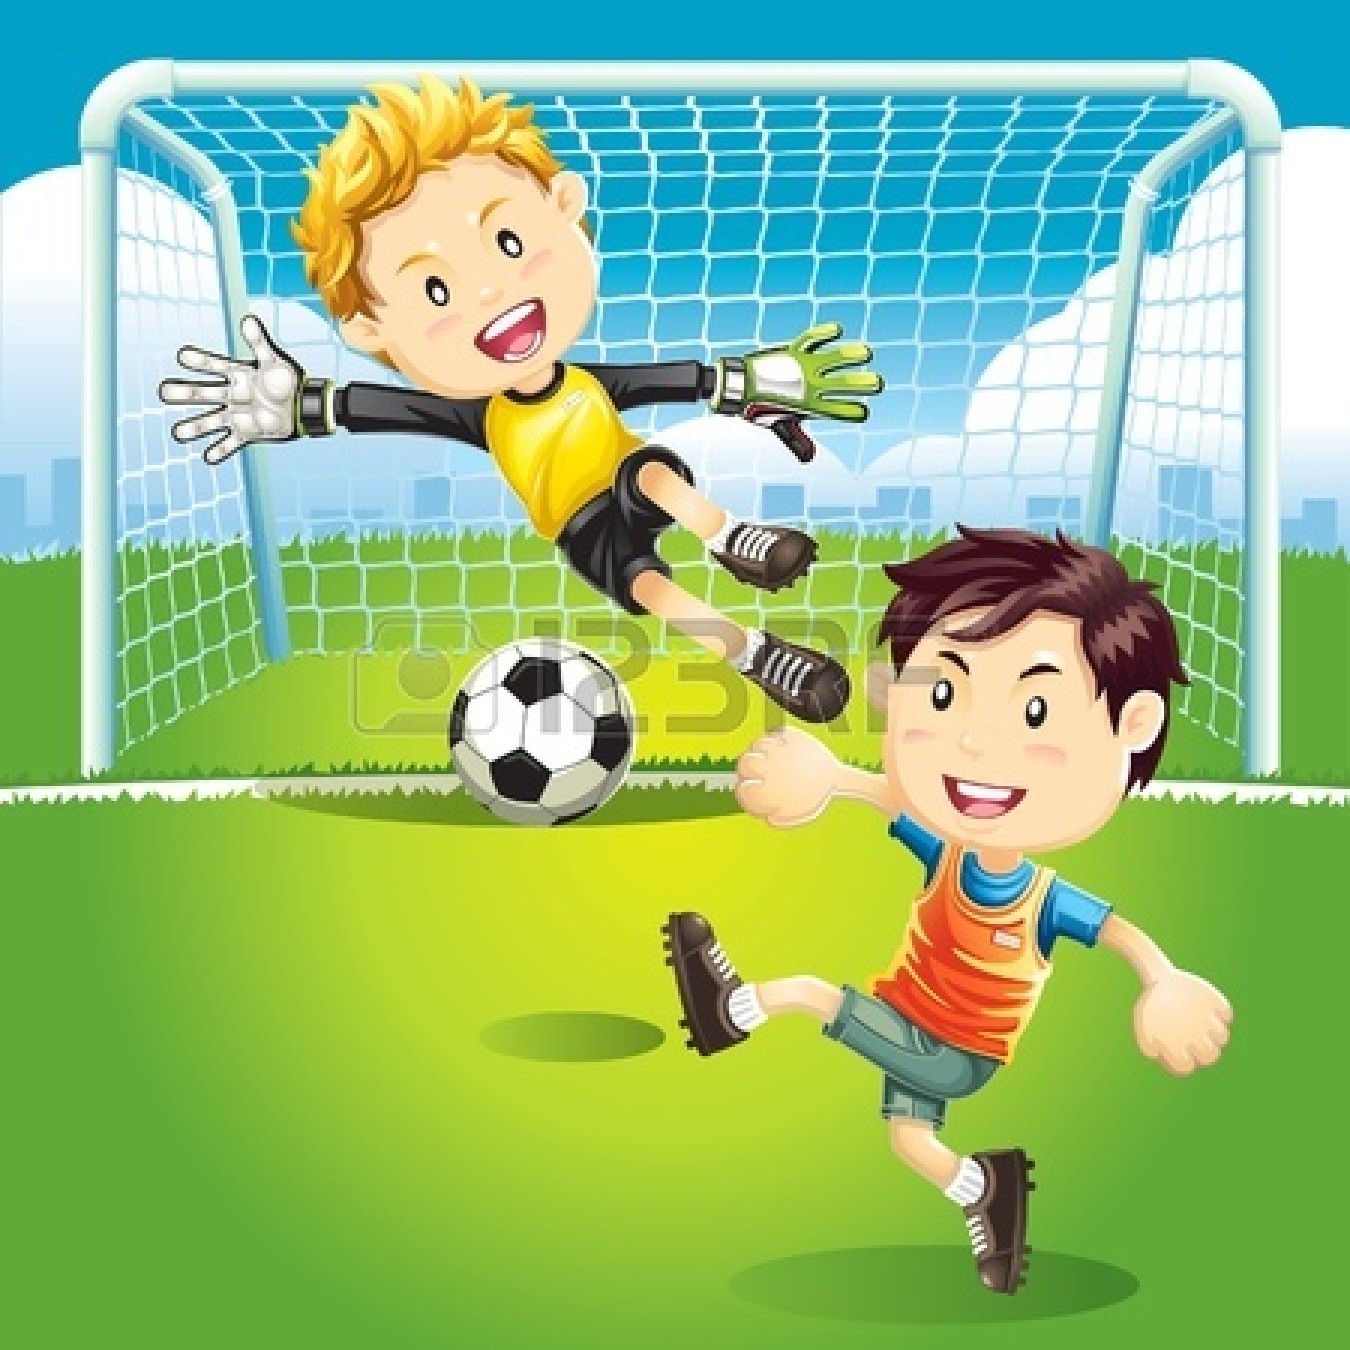 To The A Football Match   Free Images At Clker Com   Vector Clip Art